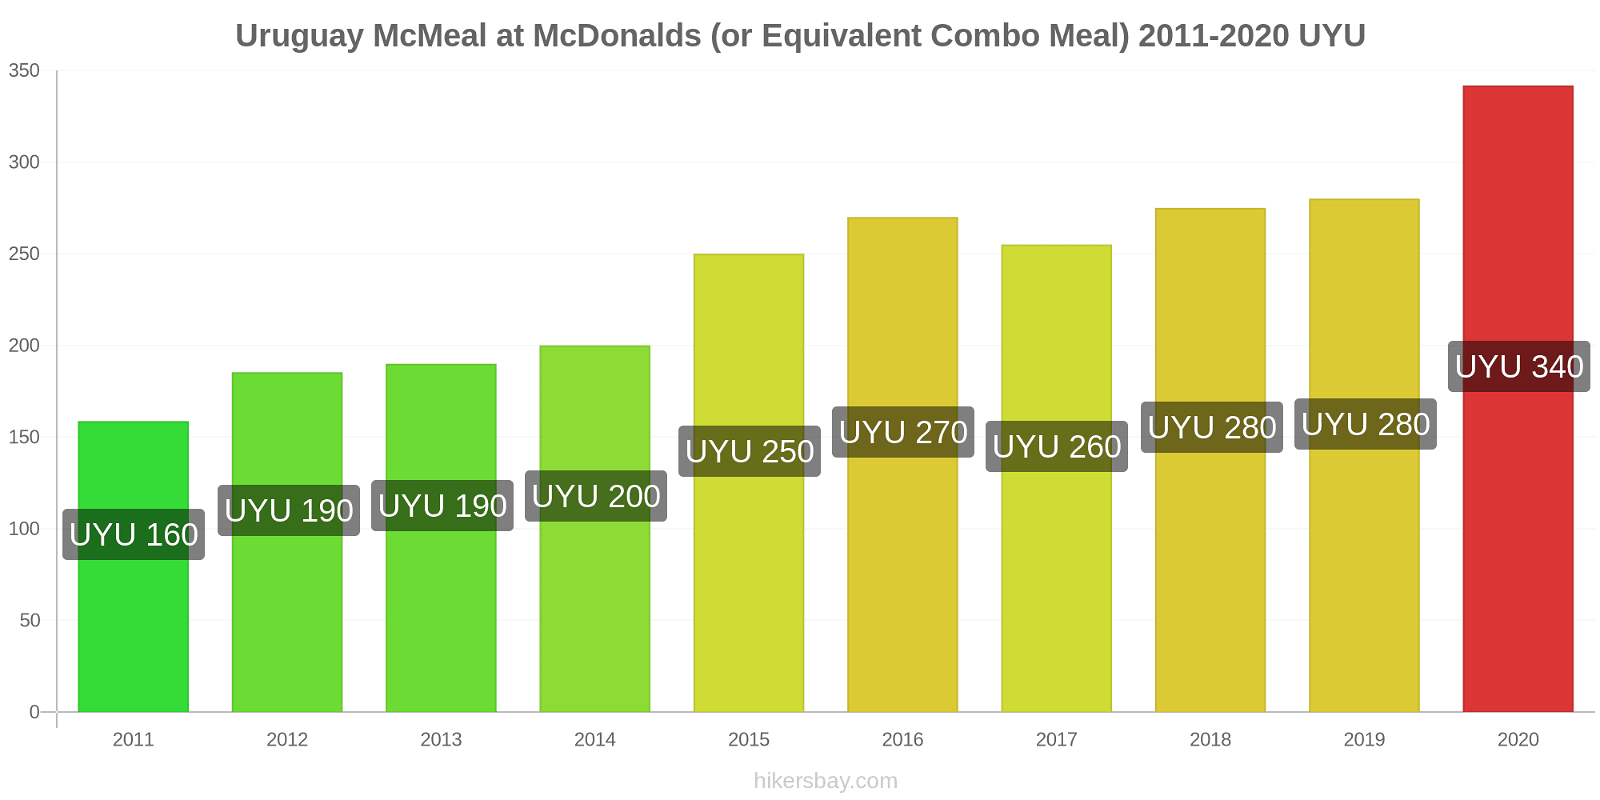 Uruguay price changes McMeal at McDonalds (or Equivalent Combo Meal) hikersbay.com